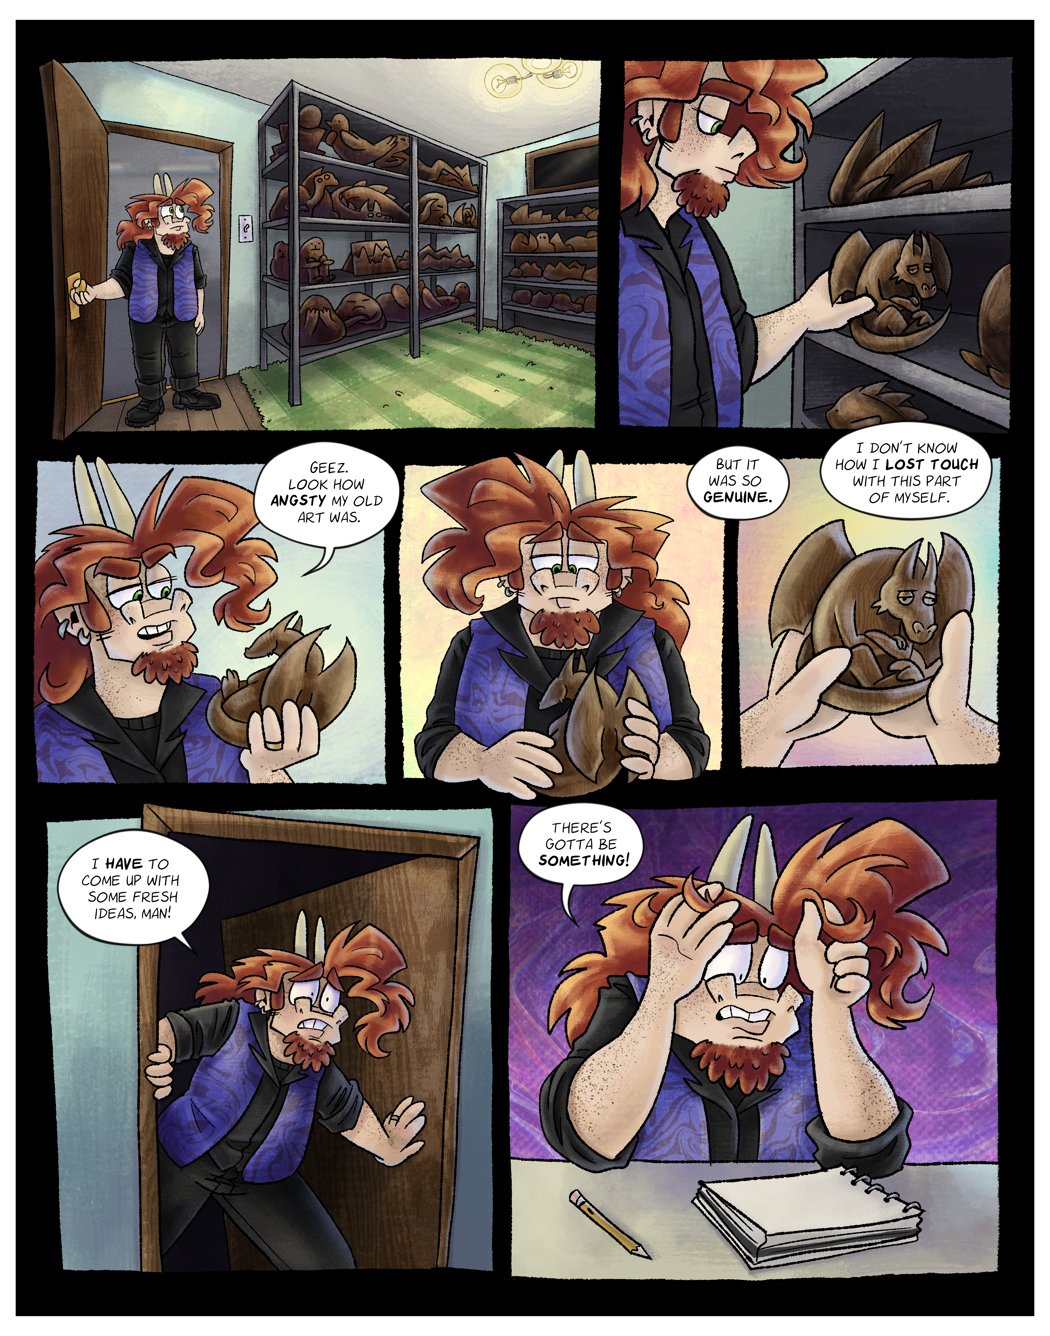 Chapter 3 page 4: It Wasn’t Always Like This